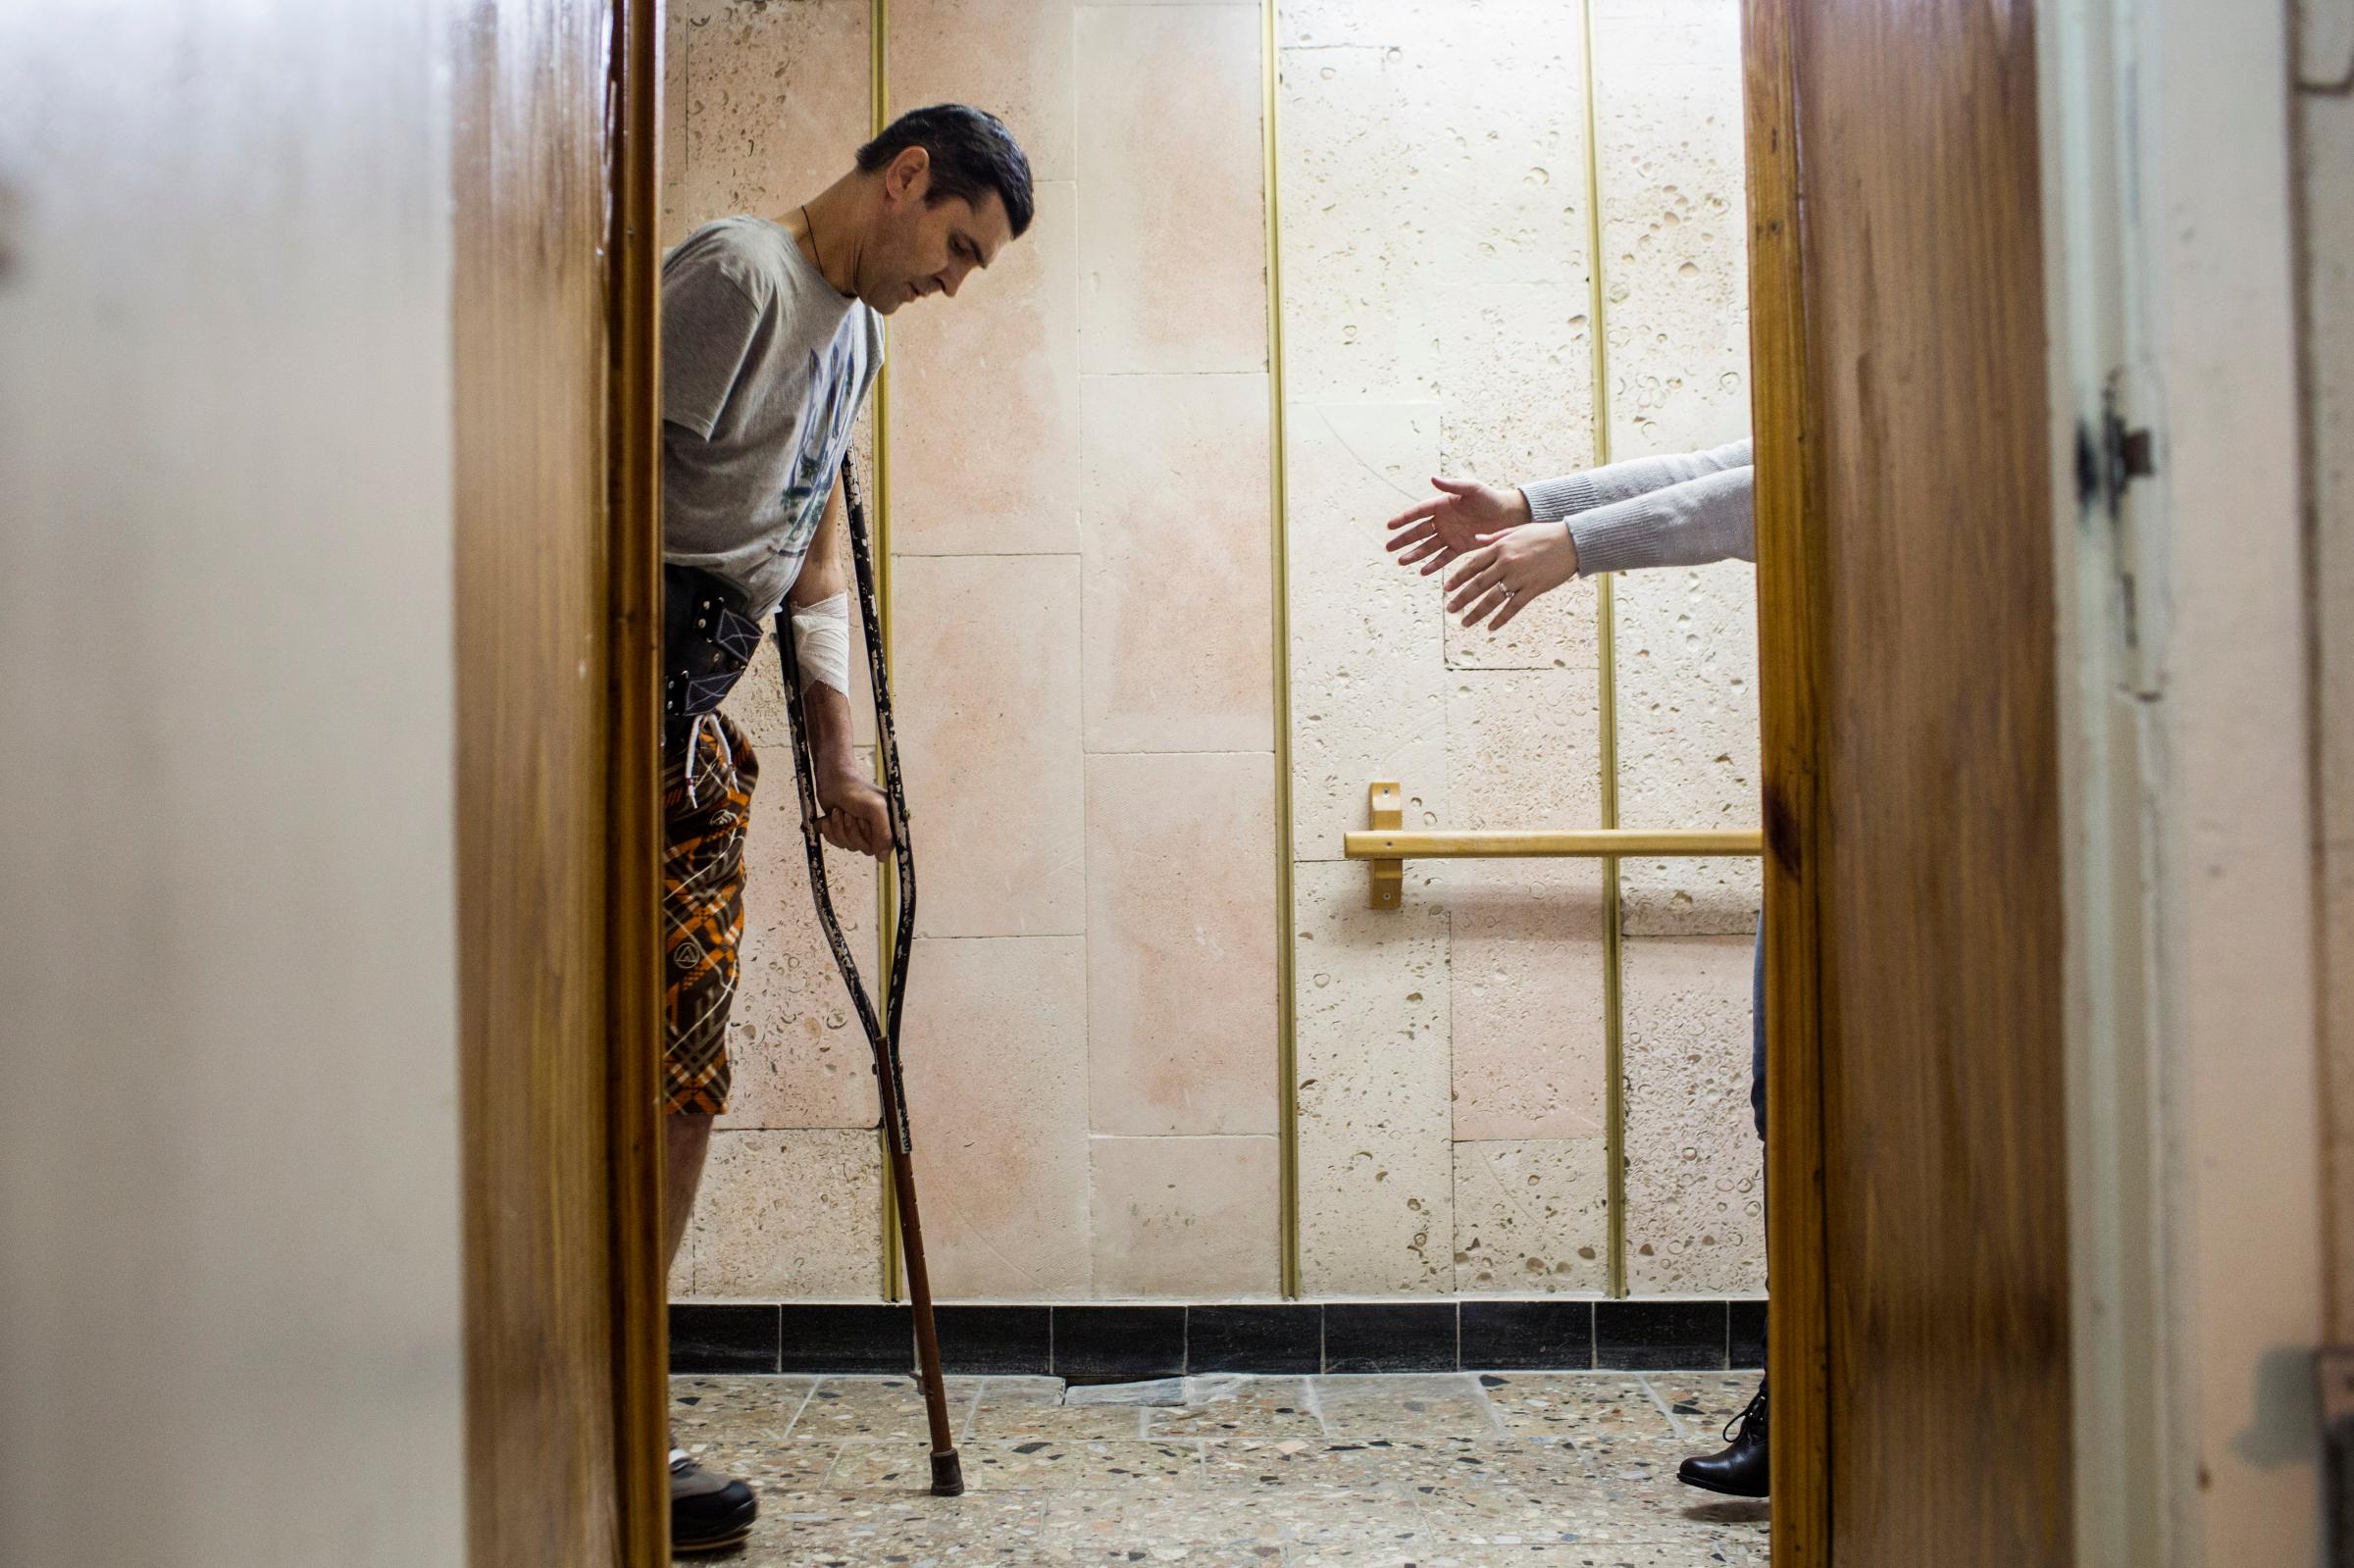 Viacheslav Buinovsky, 41, walks toward a close friend as he takes some of his first steps using a prosthetic leg at Ortotech Service, a prosthetics workshop in Kiev, Ukraine, Feb. 10, 2015. Buinovsky worked as a mechanic in Sumy Oblast prior to the Euromaidan revolution, in which he took an active role. He joined the Aidar Battalion, a volunteer unit, after the revolution and was severely wounded near Luhansk in September 2014. His right hand and right leg were amputated. "I would like to return to fight, but I do not have the ability," he said. "What I can do to contribute from here, I will do. Everyone who was there would like to return back ... but not everyone can."